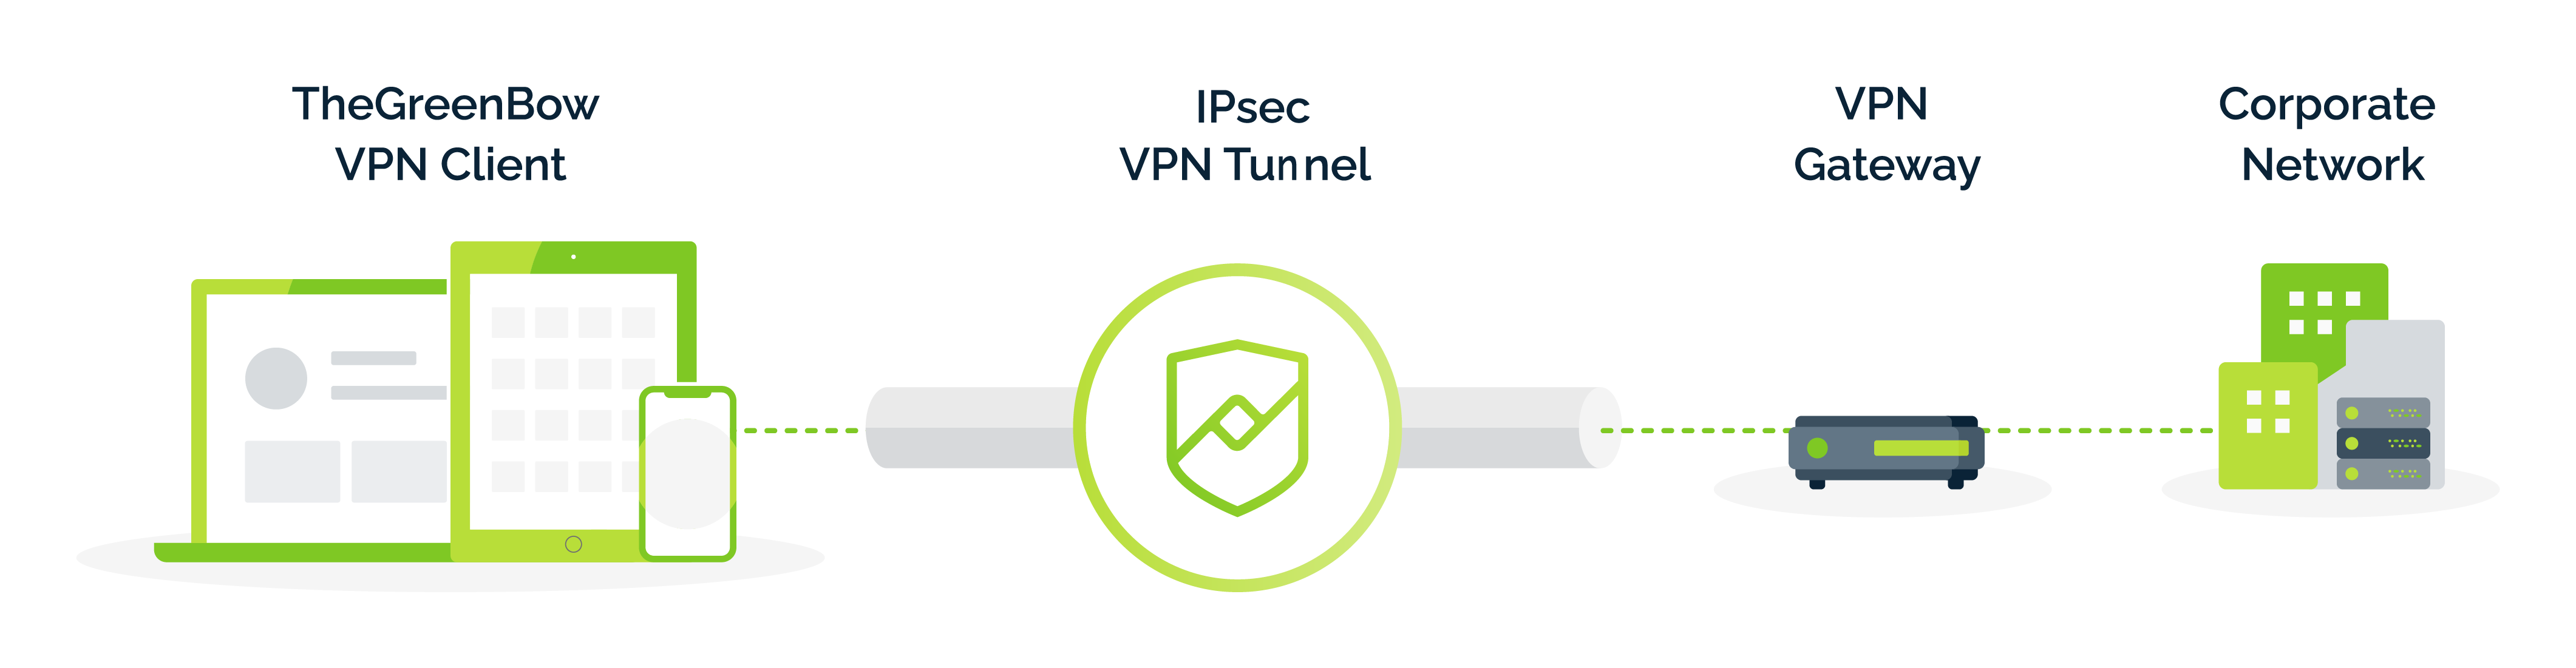 check point endpoint security vpn for mac os x 10.12